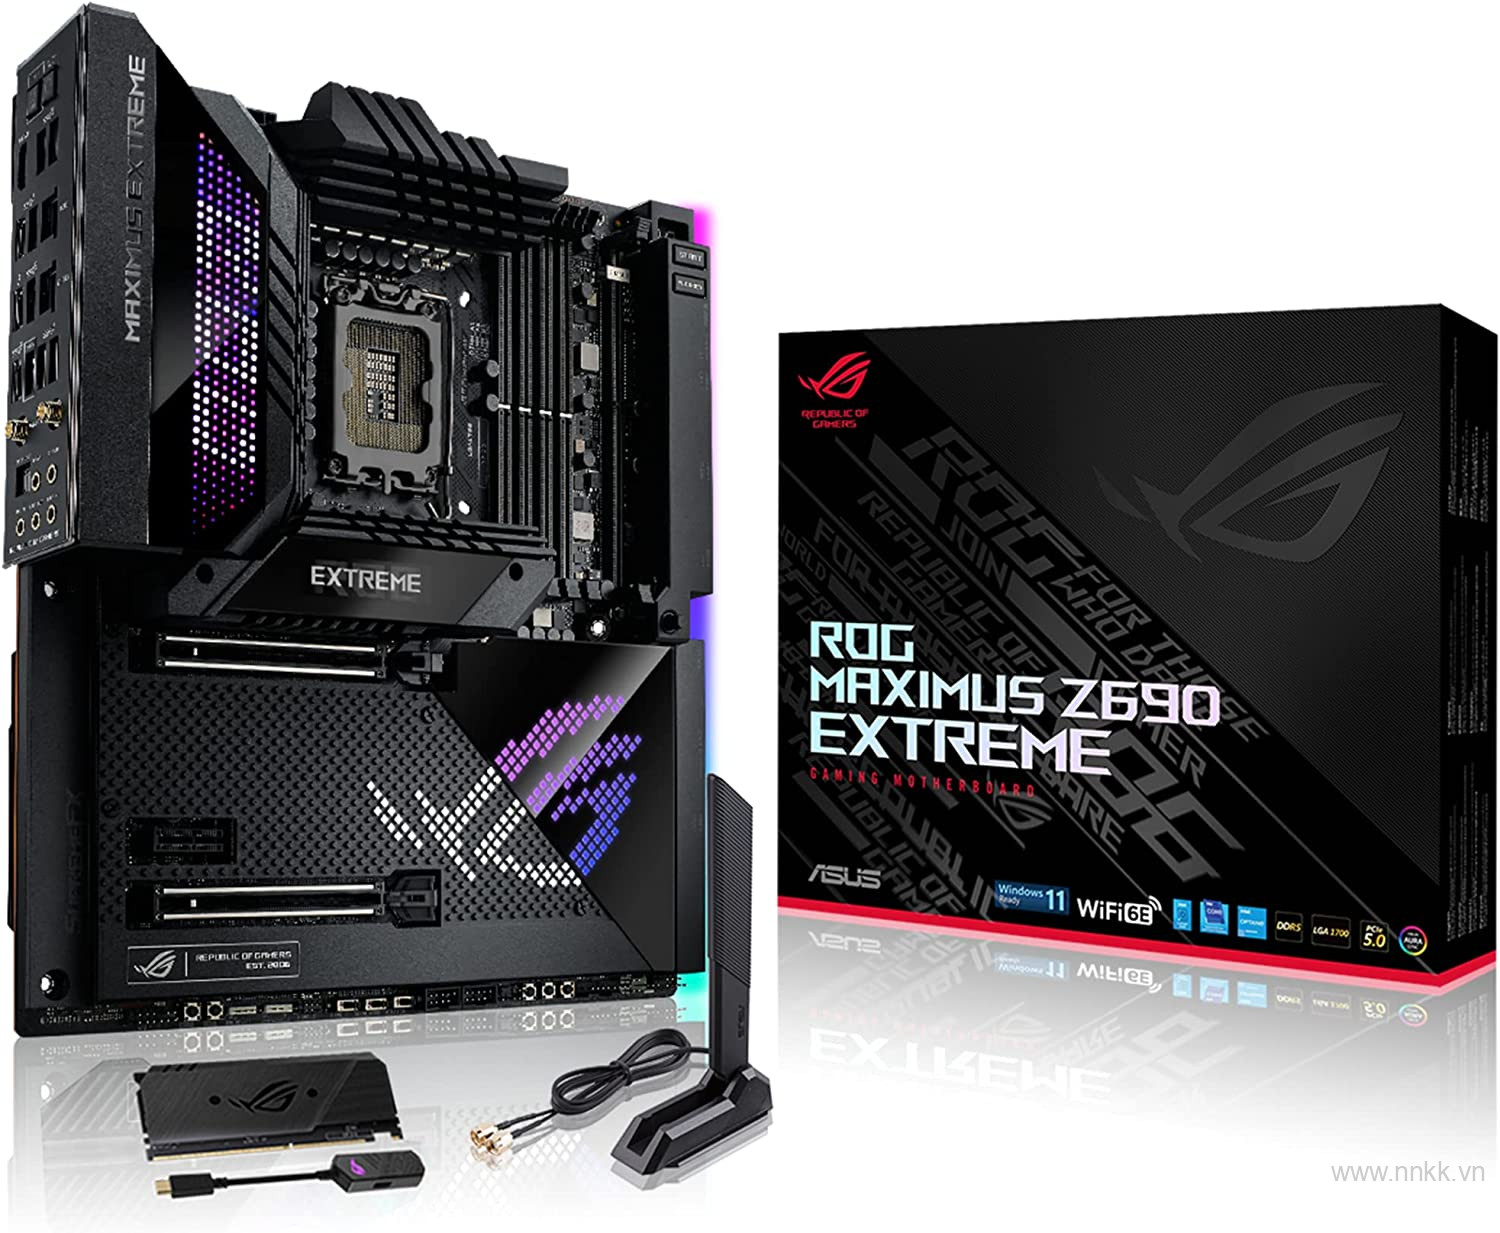 Mainboard ASUS ROG MAXIMUS Z690 EXTREME